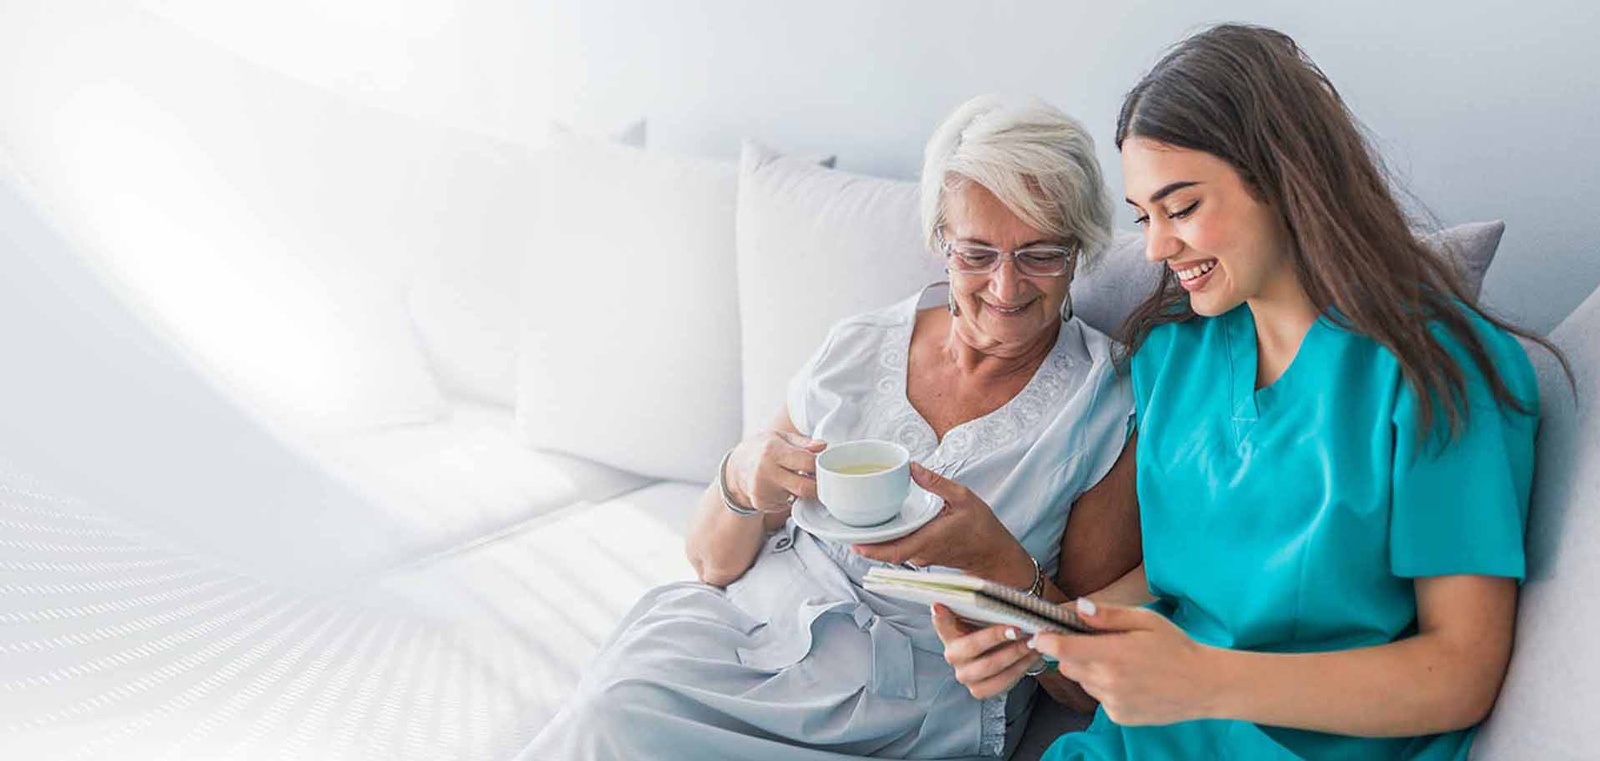 Our Skilled Caregiver in Wetaskiwin provides Compassionate care to your loved one in the comfort of your home